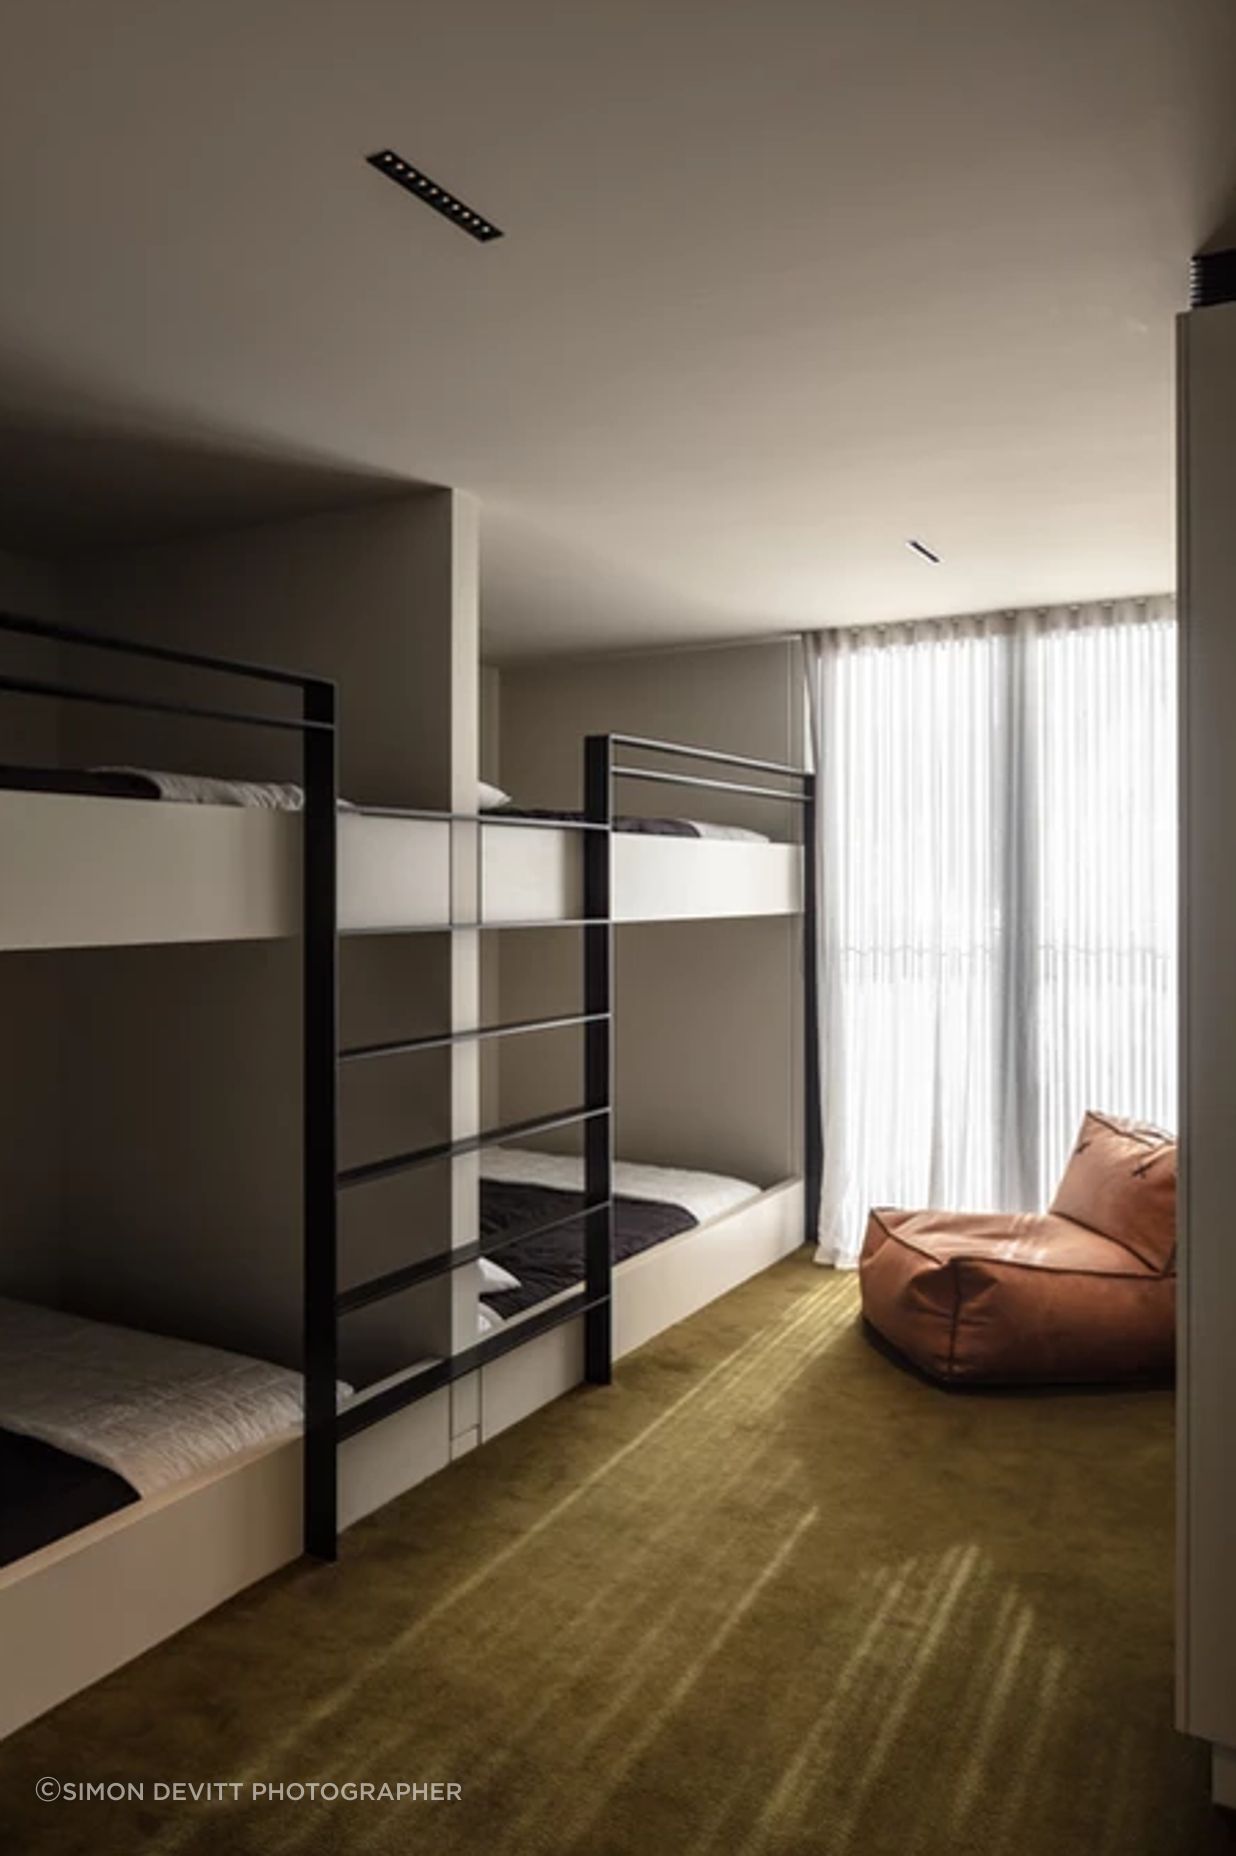 The spacious bunk rooms are upstairs. Fiona chose the Sallée carpet to fit the surroundings.  “We've got the green bush all around us. And then across the lake the hills are a really lush, khaki green.”